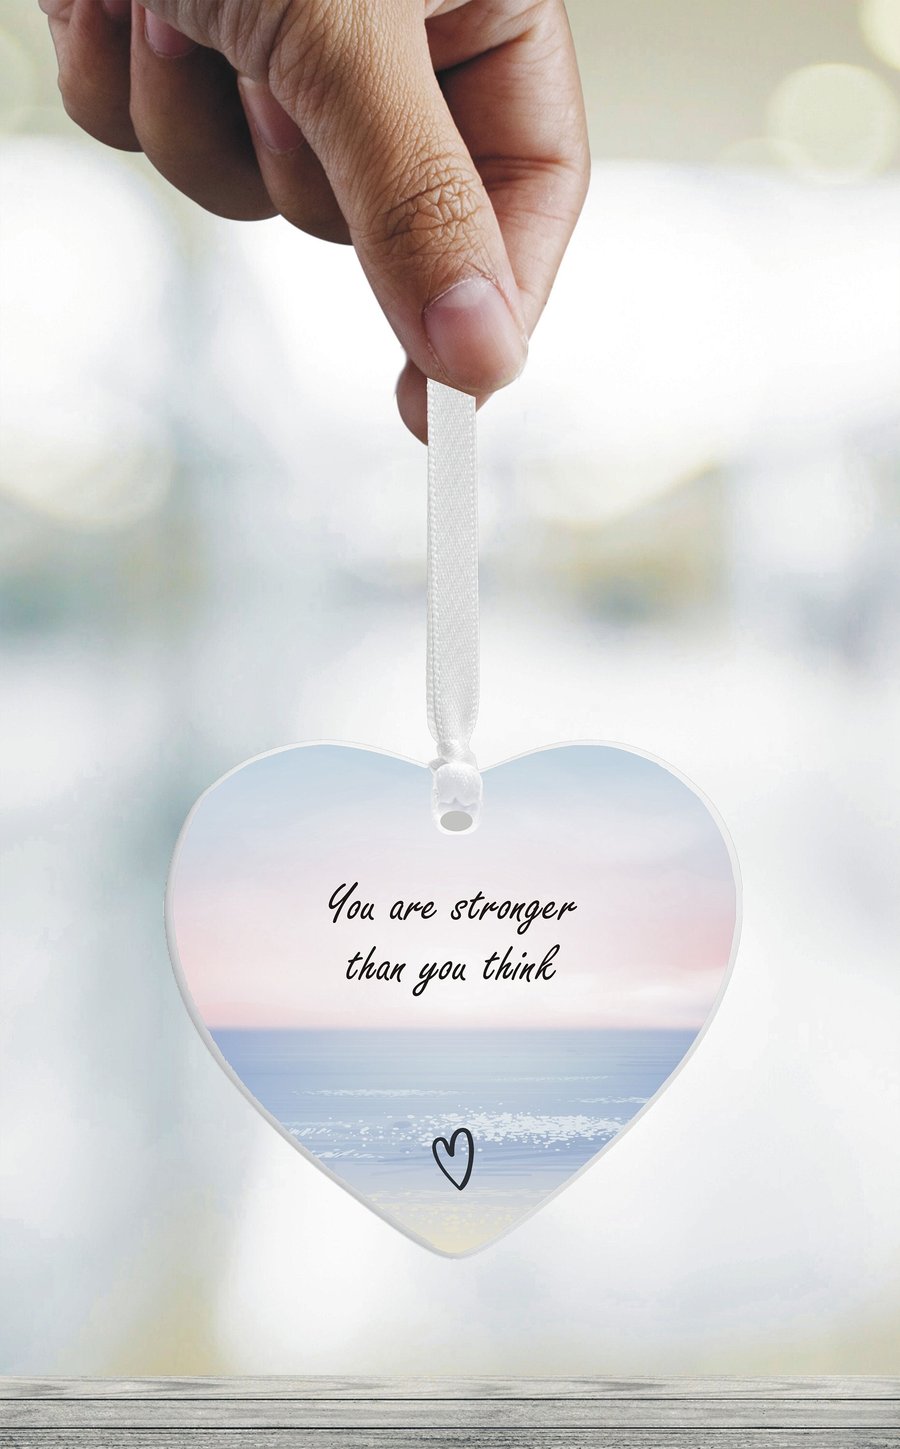 You Are Stronger Than You Think Ceramic Heart Gift - Thinking of You Gift